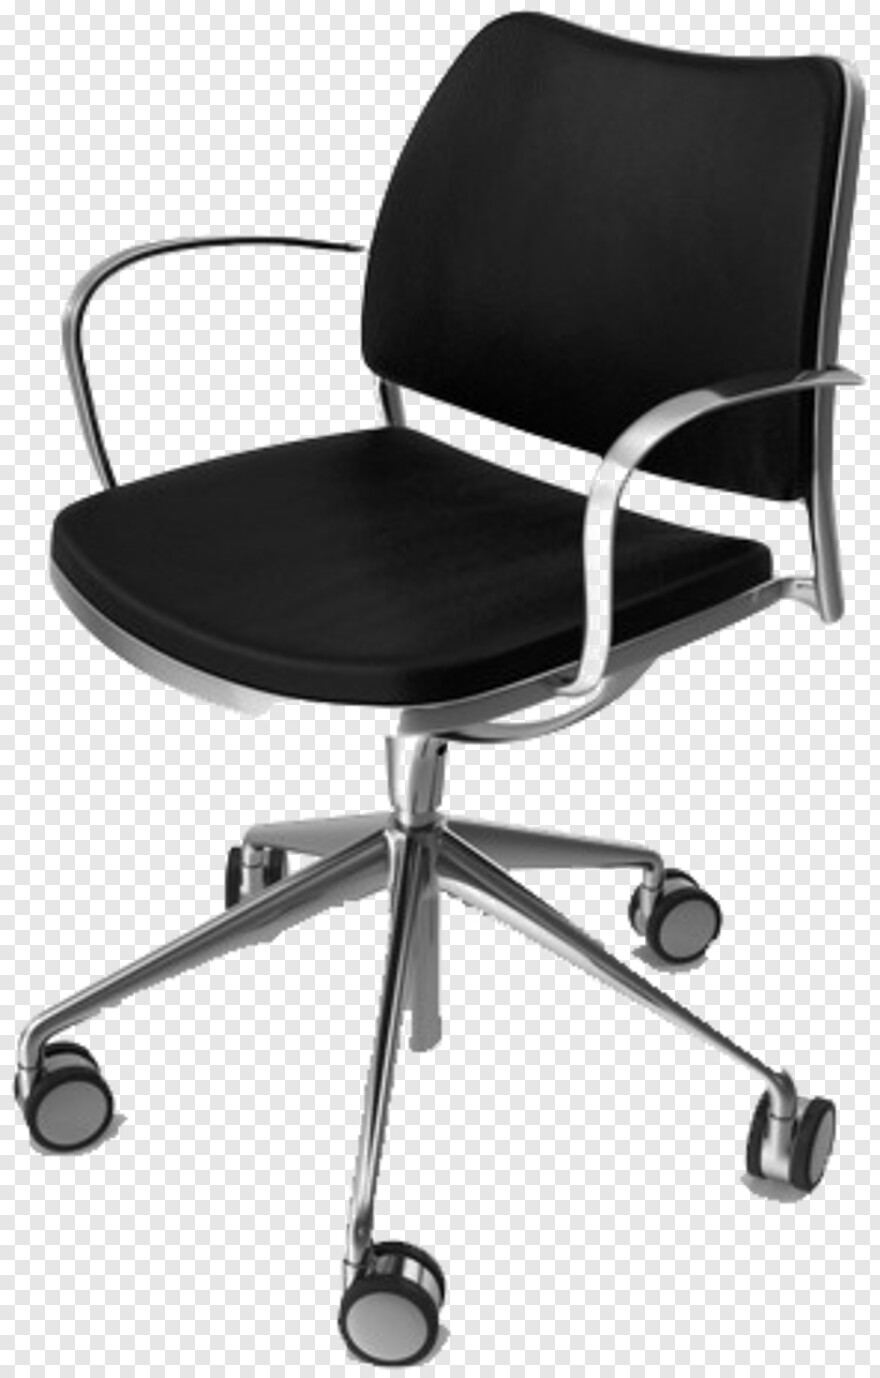  Office Chair, Person Sitting In Chair, Office Icon, Folding Chair, Steel Cage, Office Building